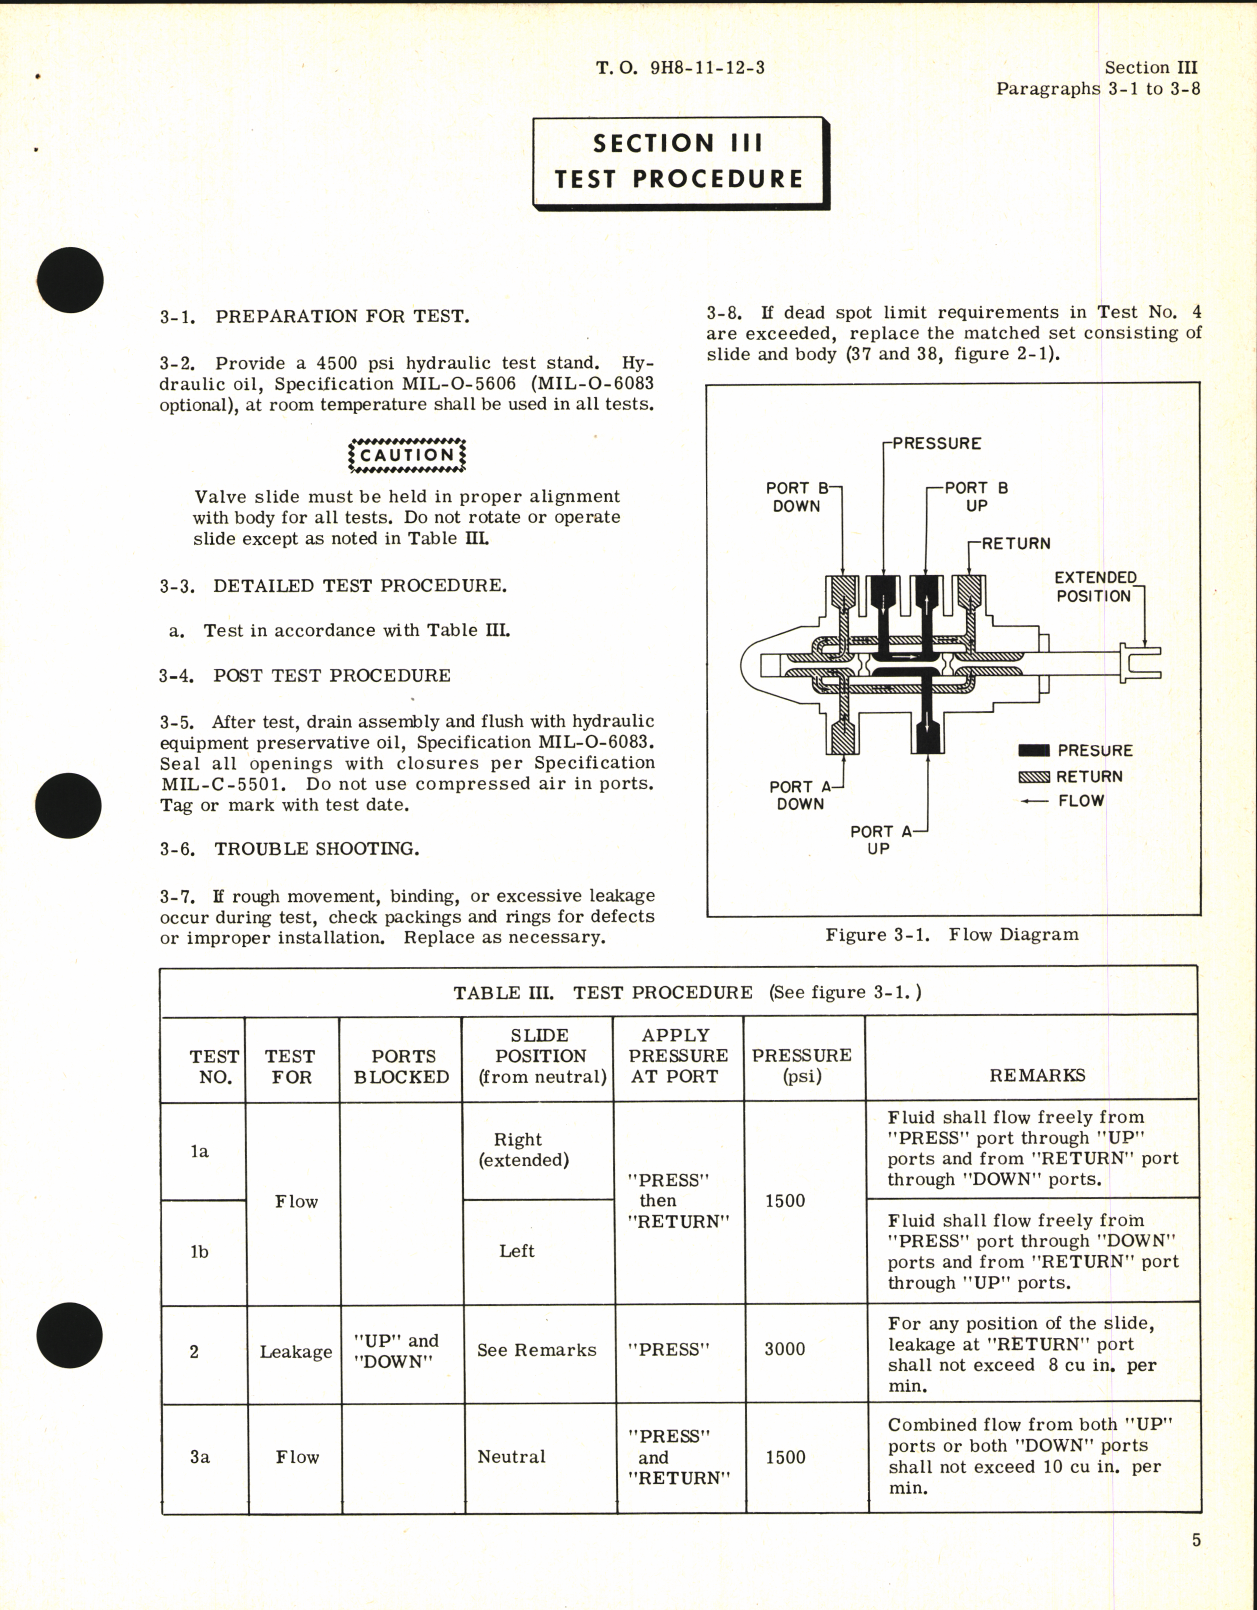 Sample page 7 from AirCorps Library document: Overhaul Instructions  for Modulated Spoiler Metering Valve Assemblies